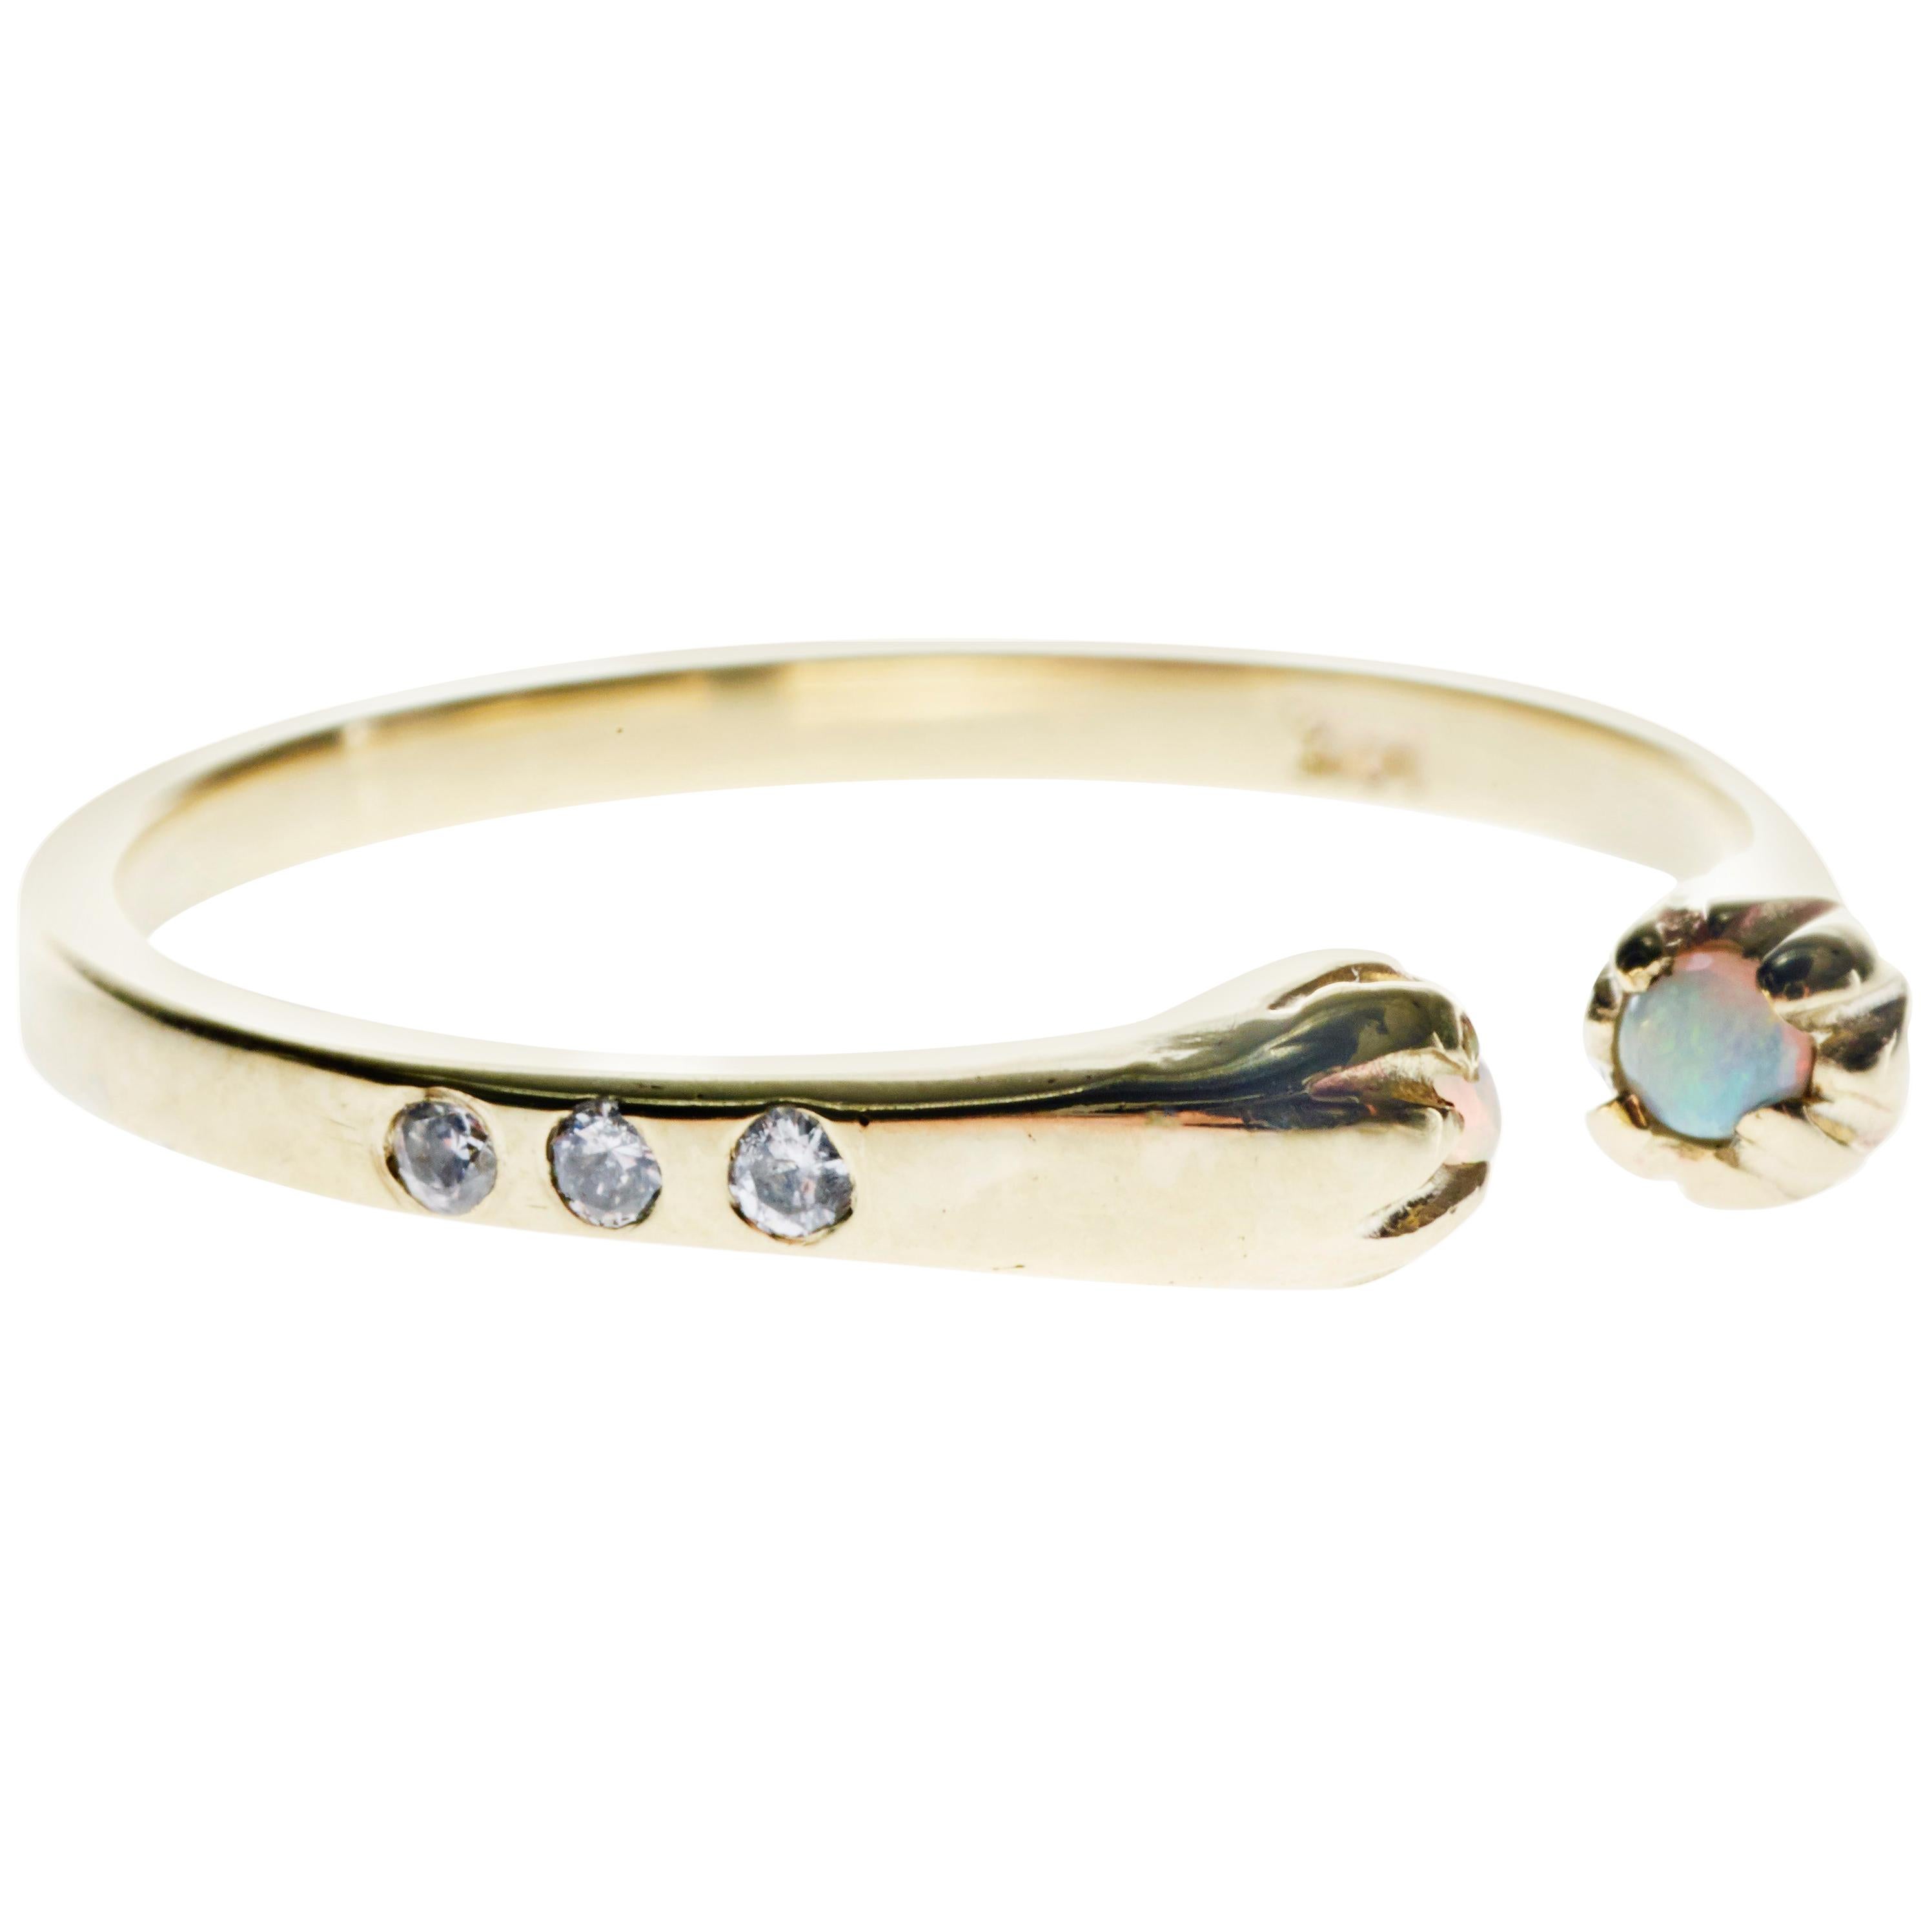 Gold Band Ring White Diamond Opal Adjustable Stackable J Dauphin

J DAUPHIN 